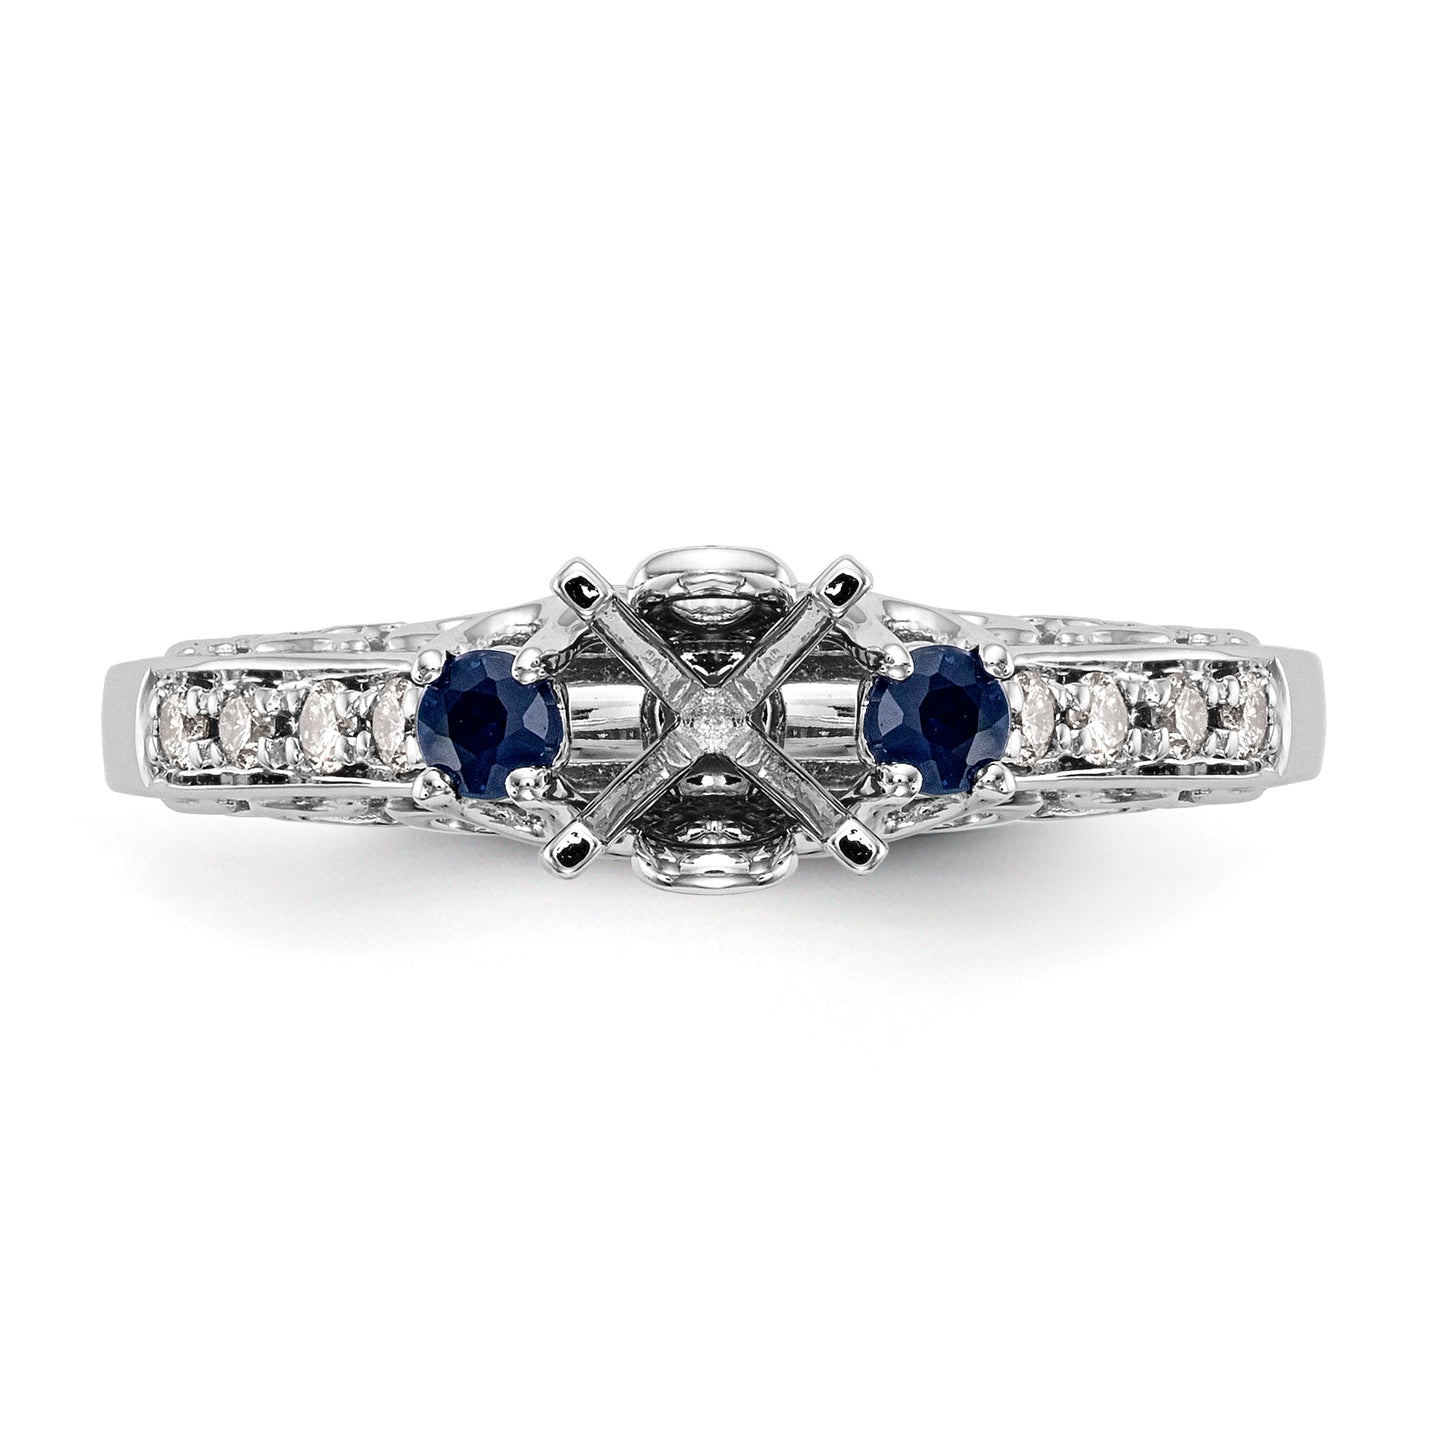 14k White Gold 3 stone Dia Peg Set with Sapphire CZ Engagement Ring